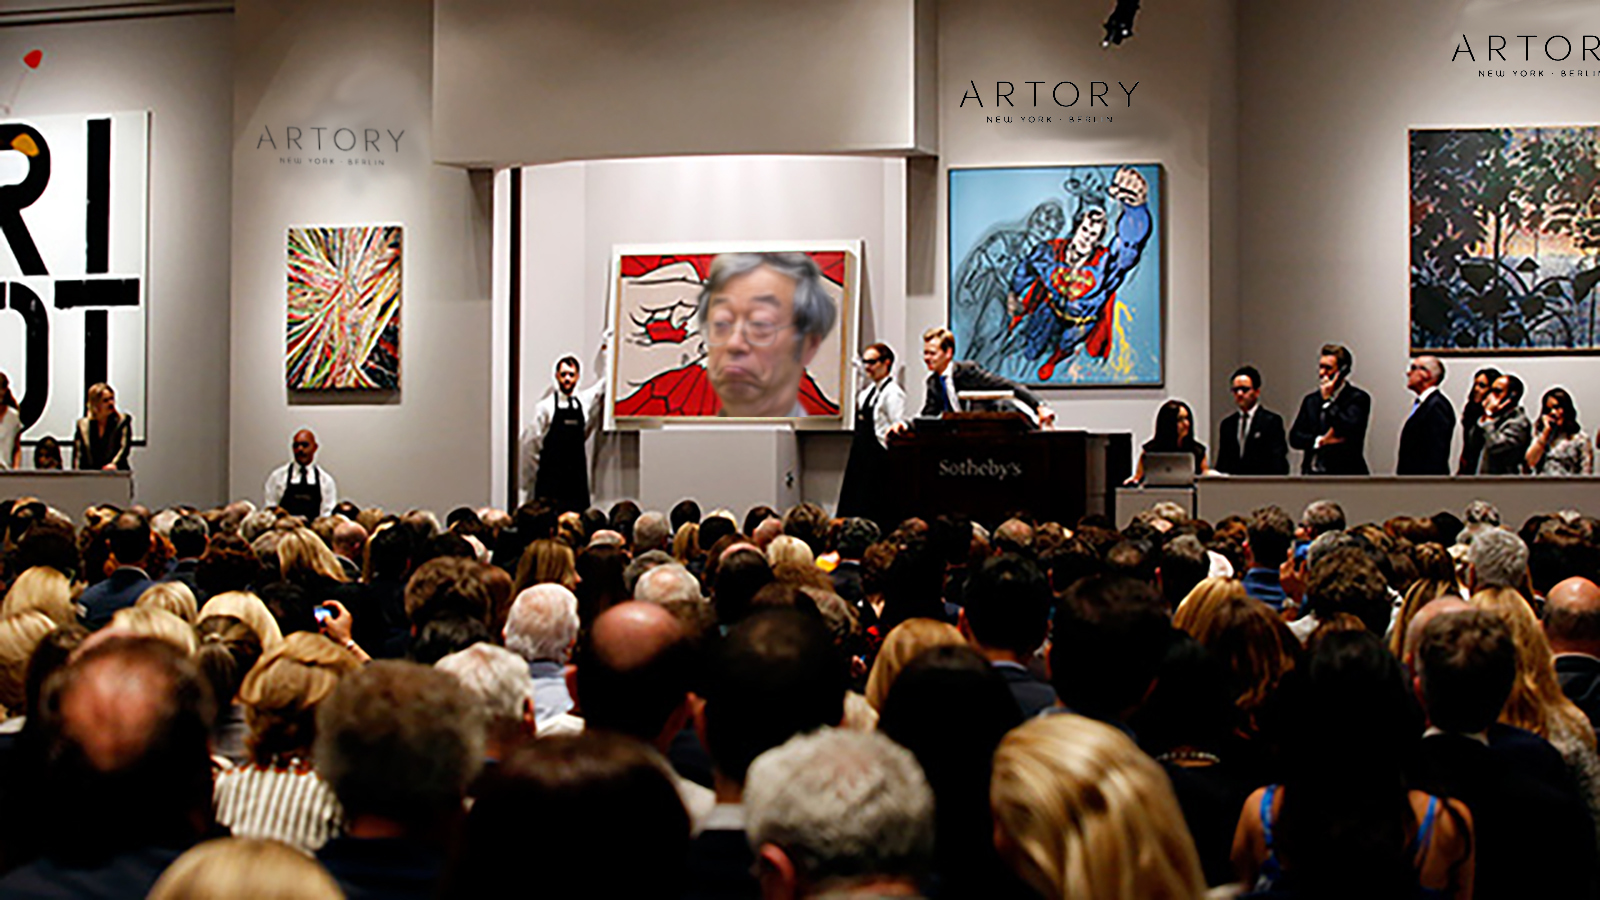 4,000 art auction houses are putting their sales records on the